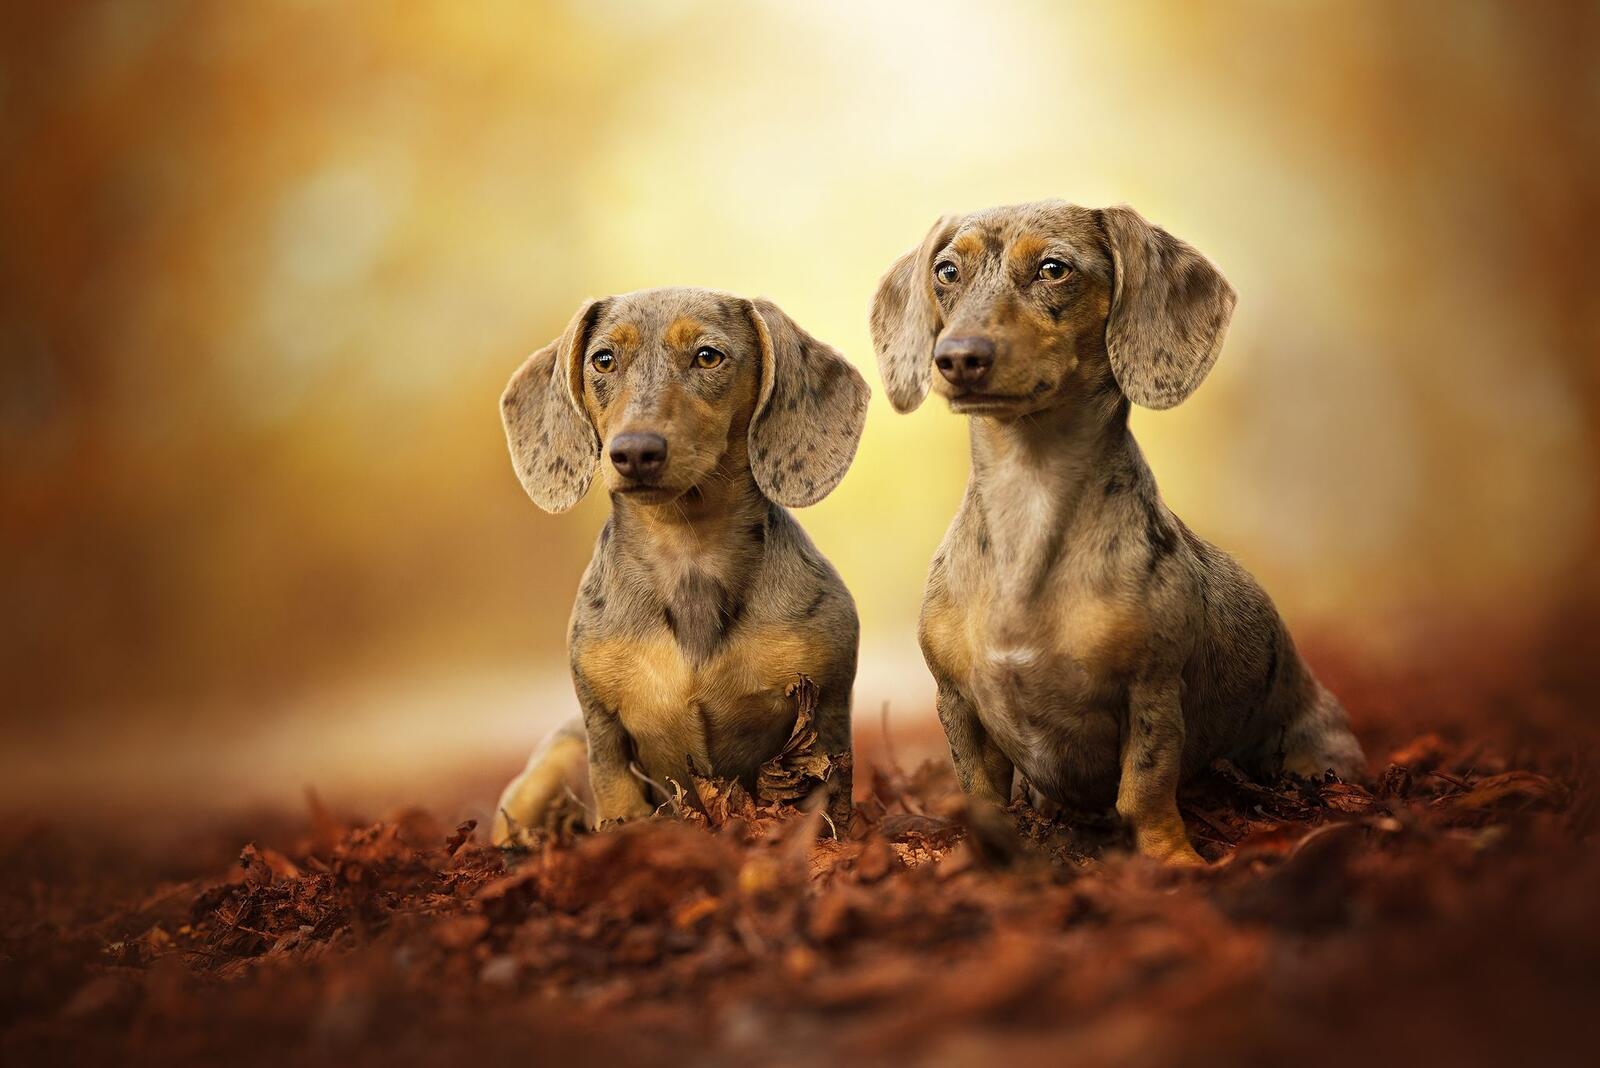 Wallpapers Dachshund dog pet on the desktop